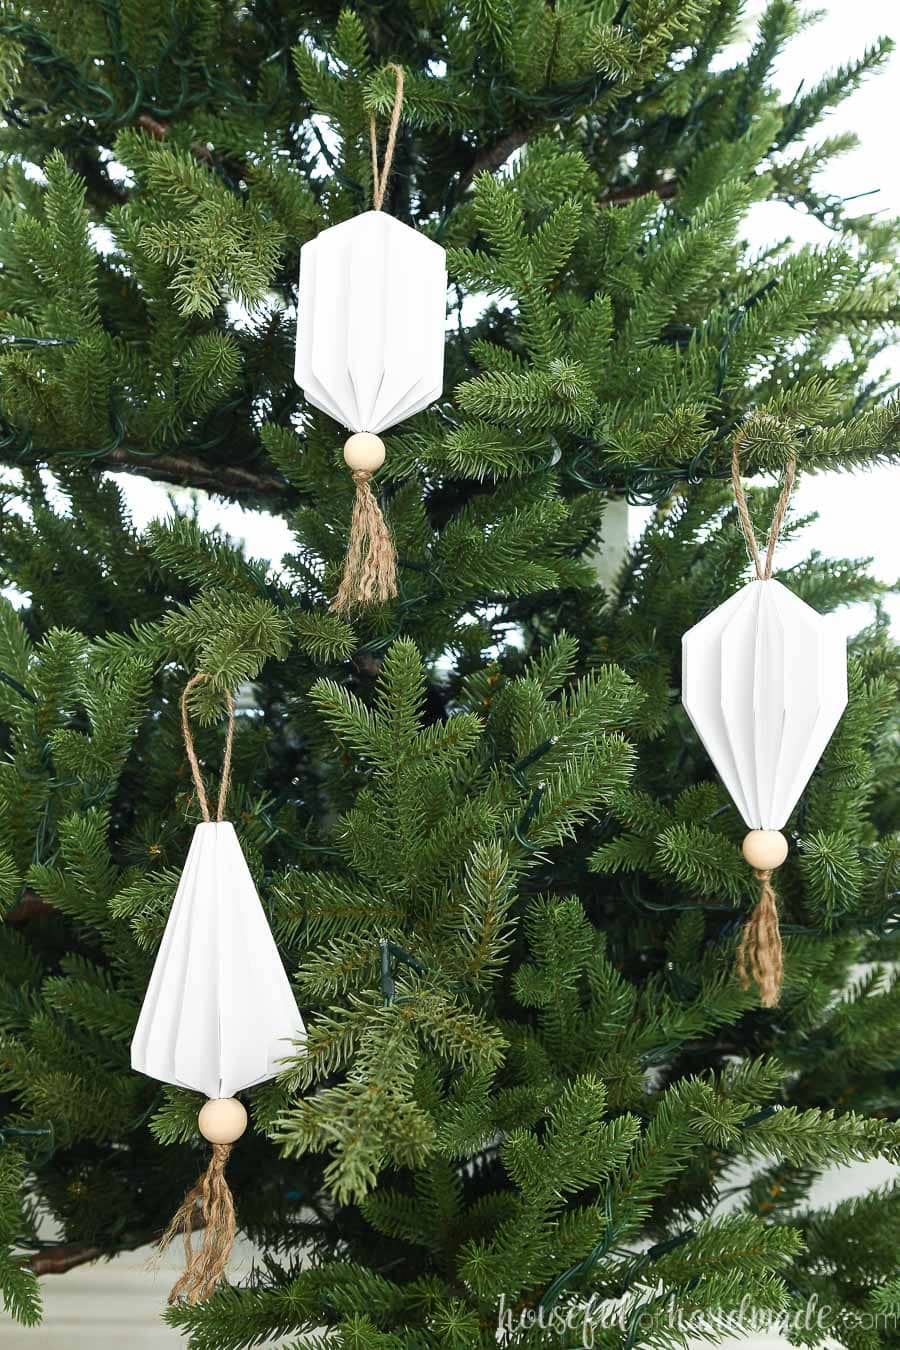 Three white paper Christmas ornaments in the shape of jewels with wood beads and tassels on the bottom.